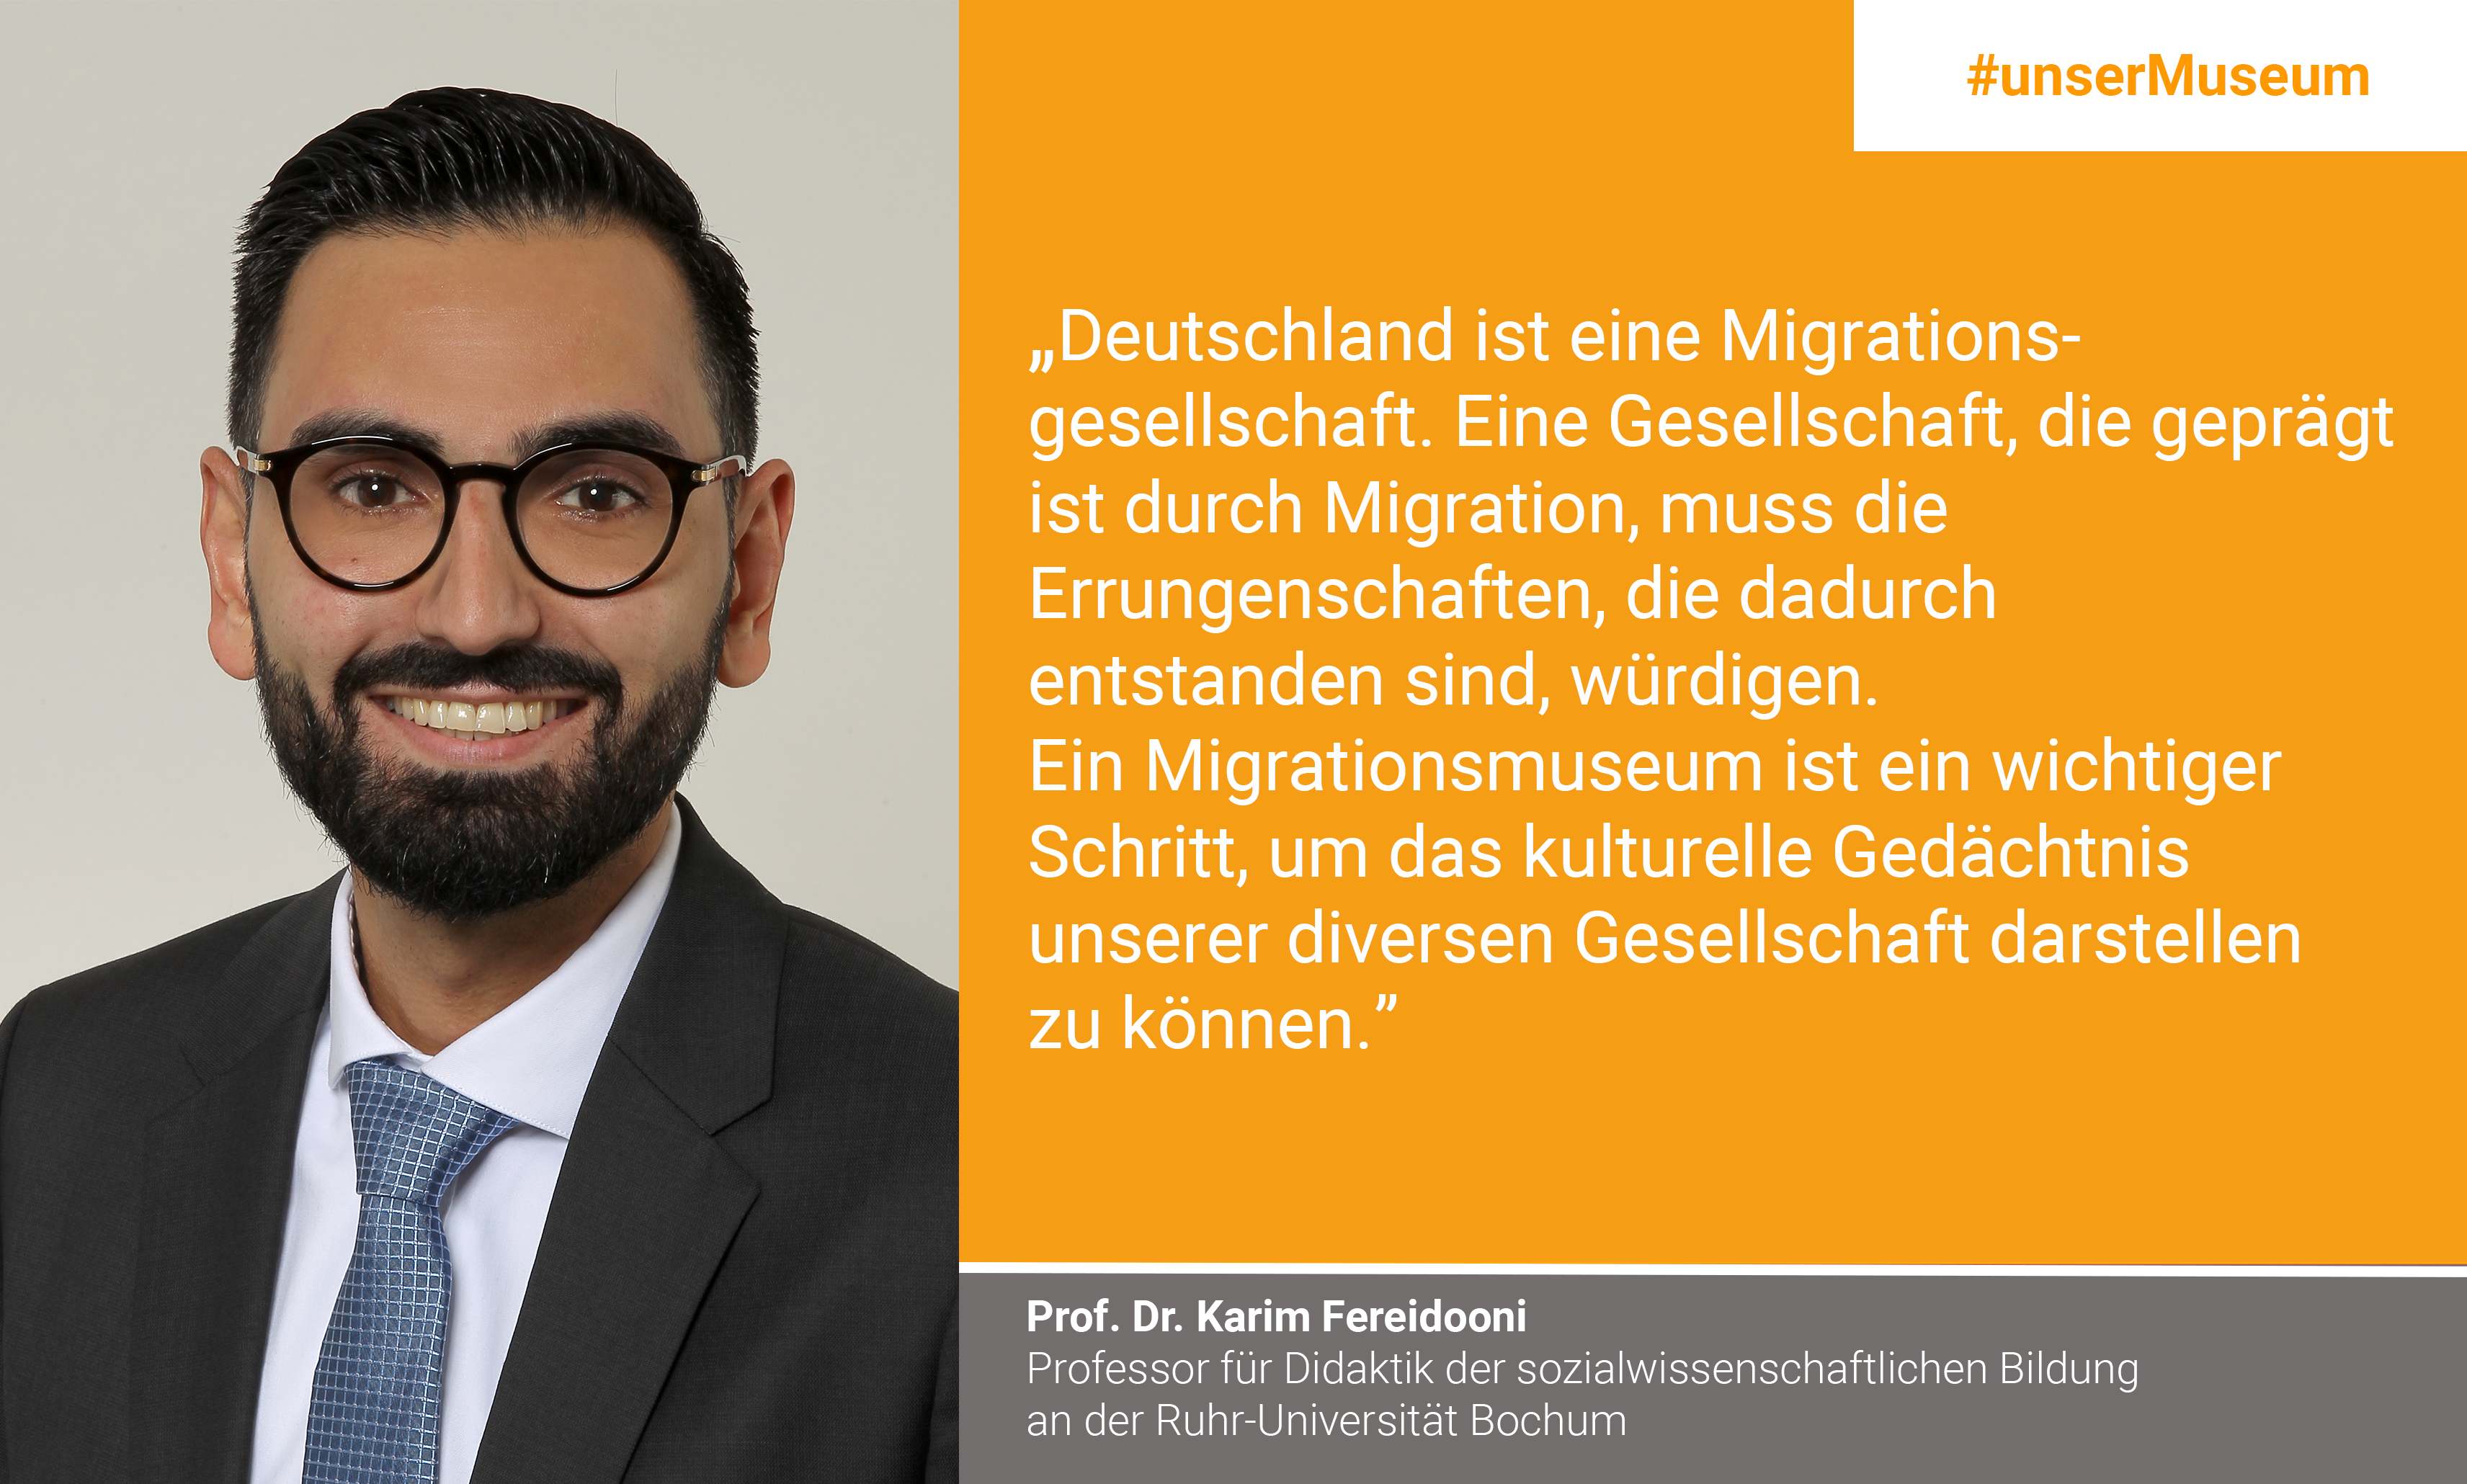 Prof. Dr. Karim Fereidooni, Professor of Didactics of Social Science Education at the Ruhr University Bochum; racism researcher: "Germany is a migration society. A society shaped by migration must honor such achievements that have been made. A migration museum is an important step to represent the cultural memory of our diverse society."